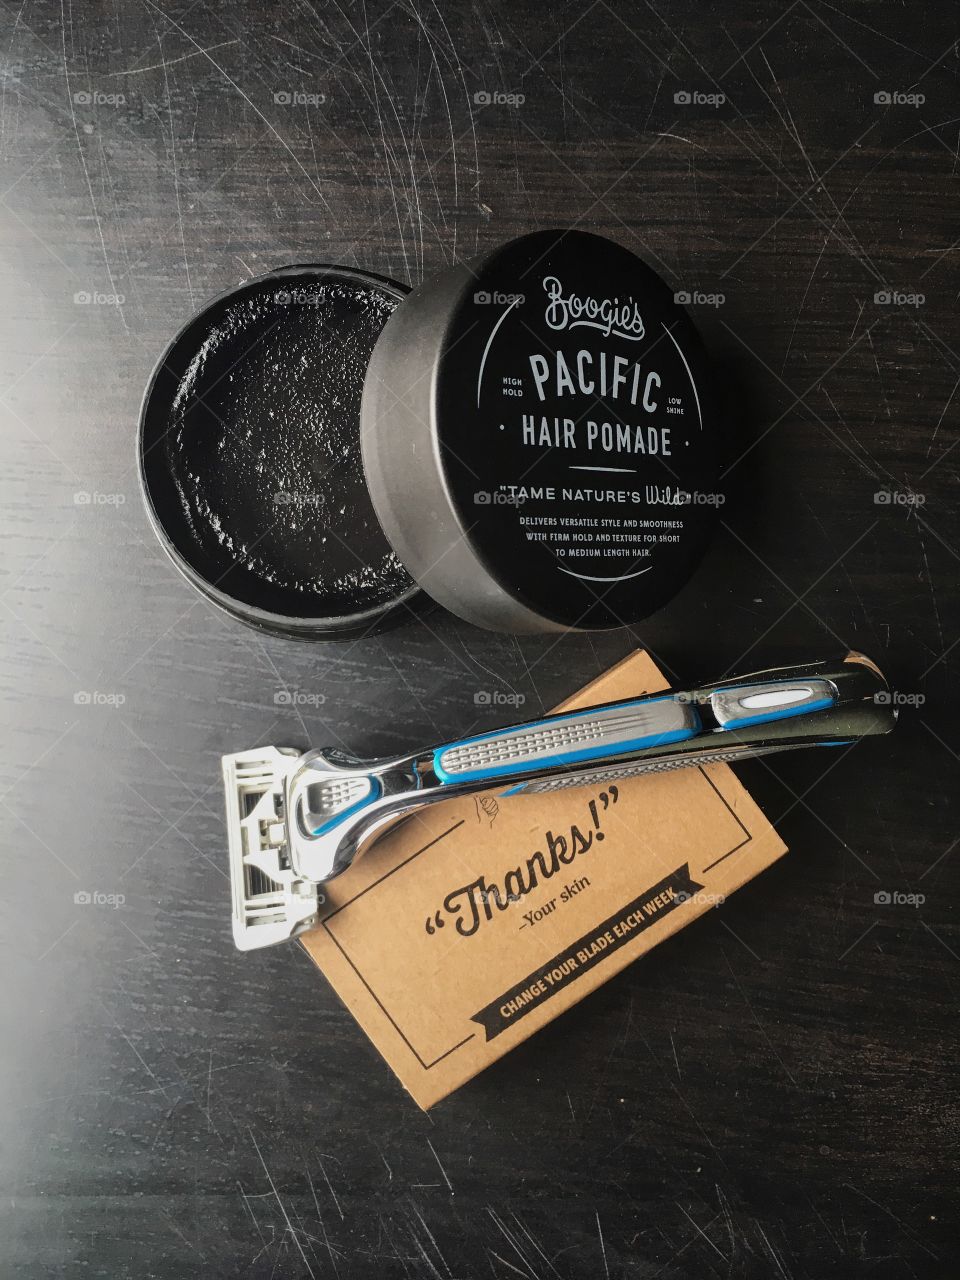 Pacific Hair Pomade. Hair products, and razor.